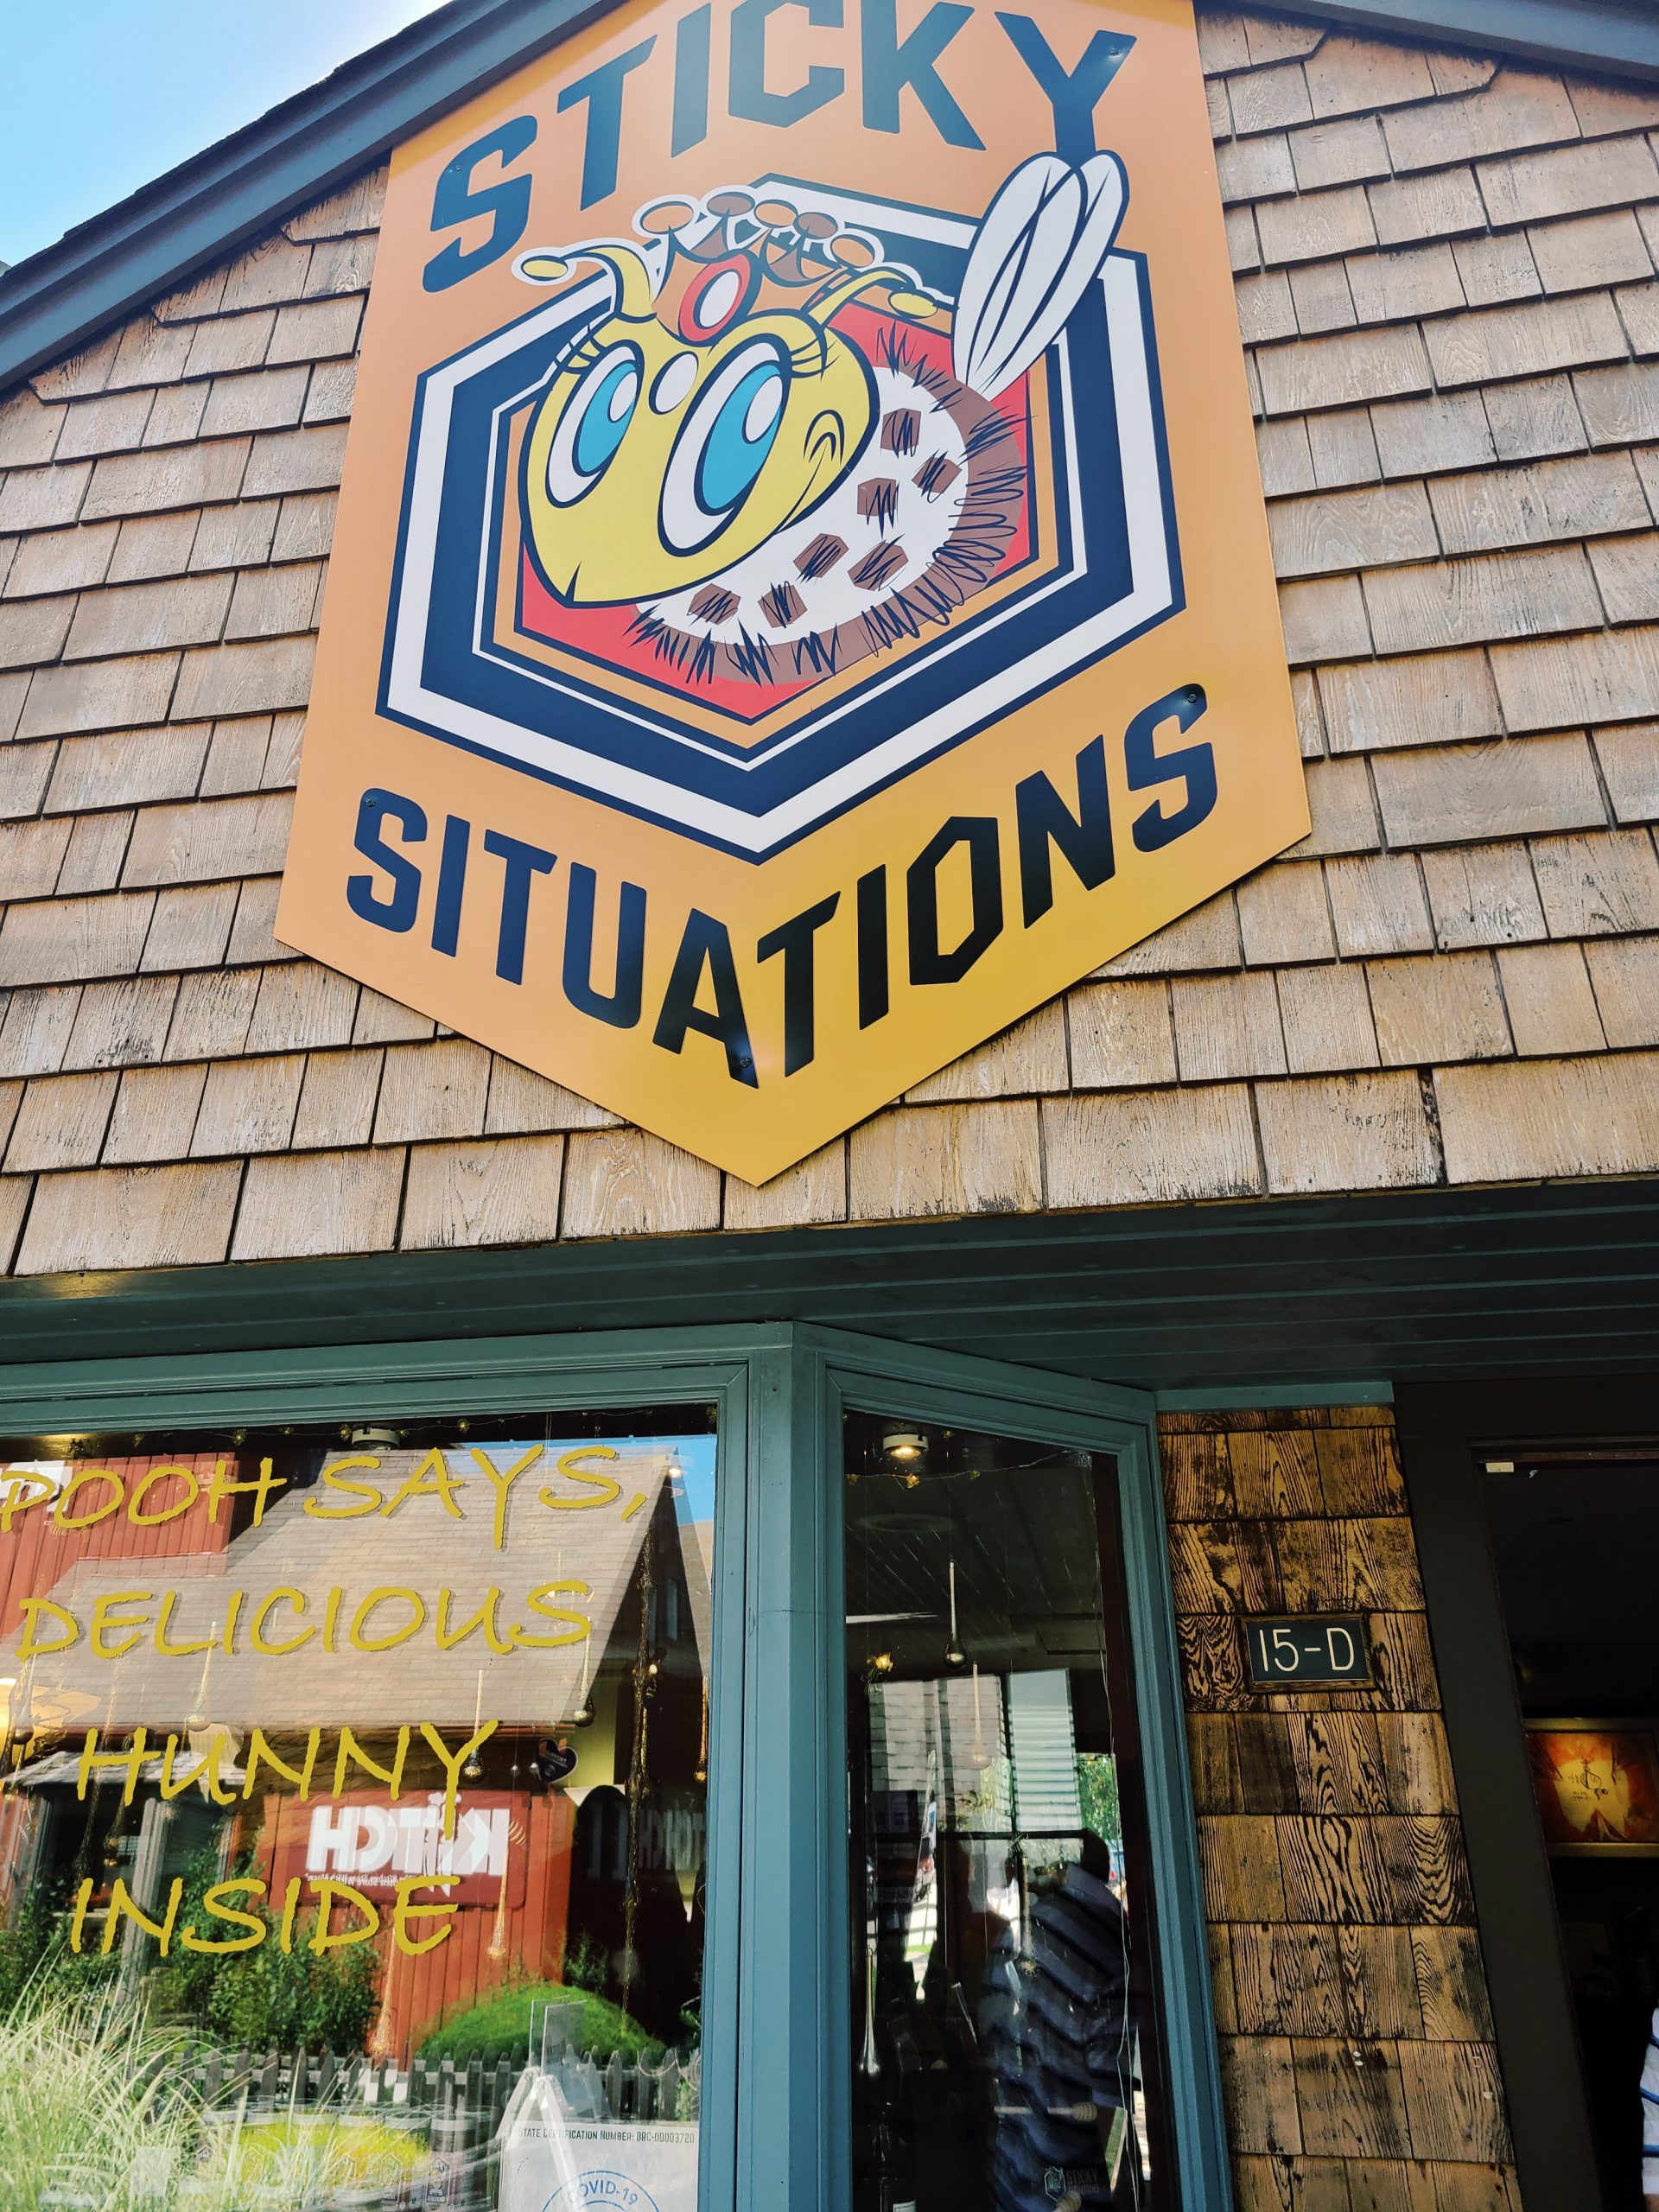 A photo of the outside of a honey shop called "Sticky Situations" in Mystic, Connecticut